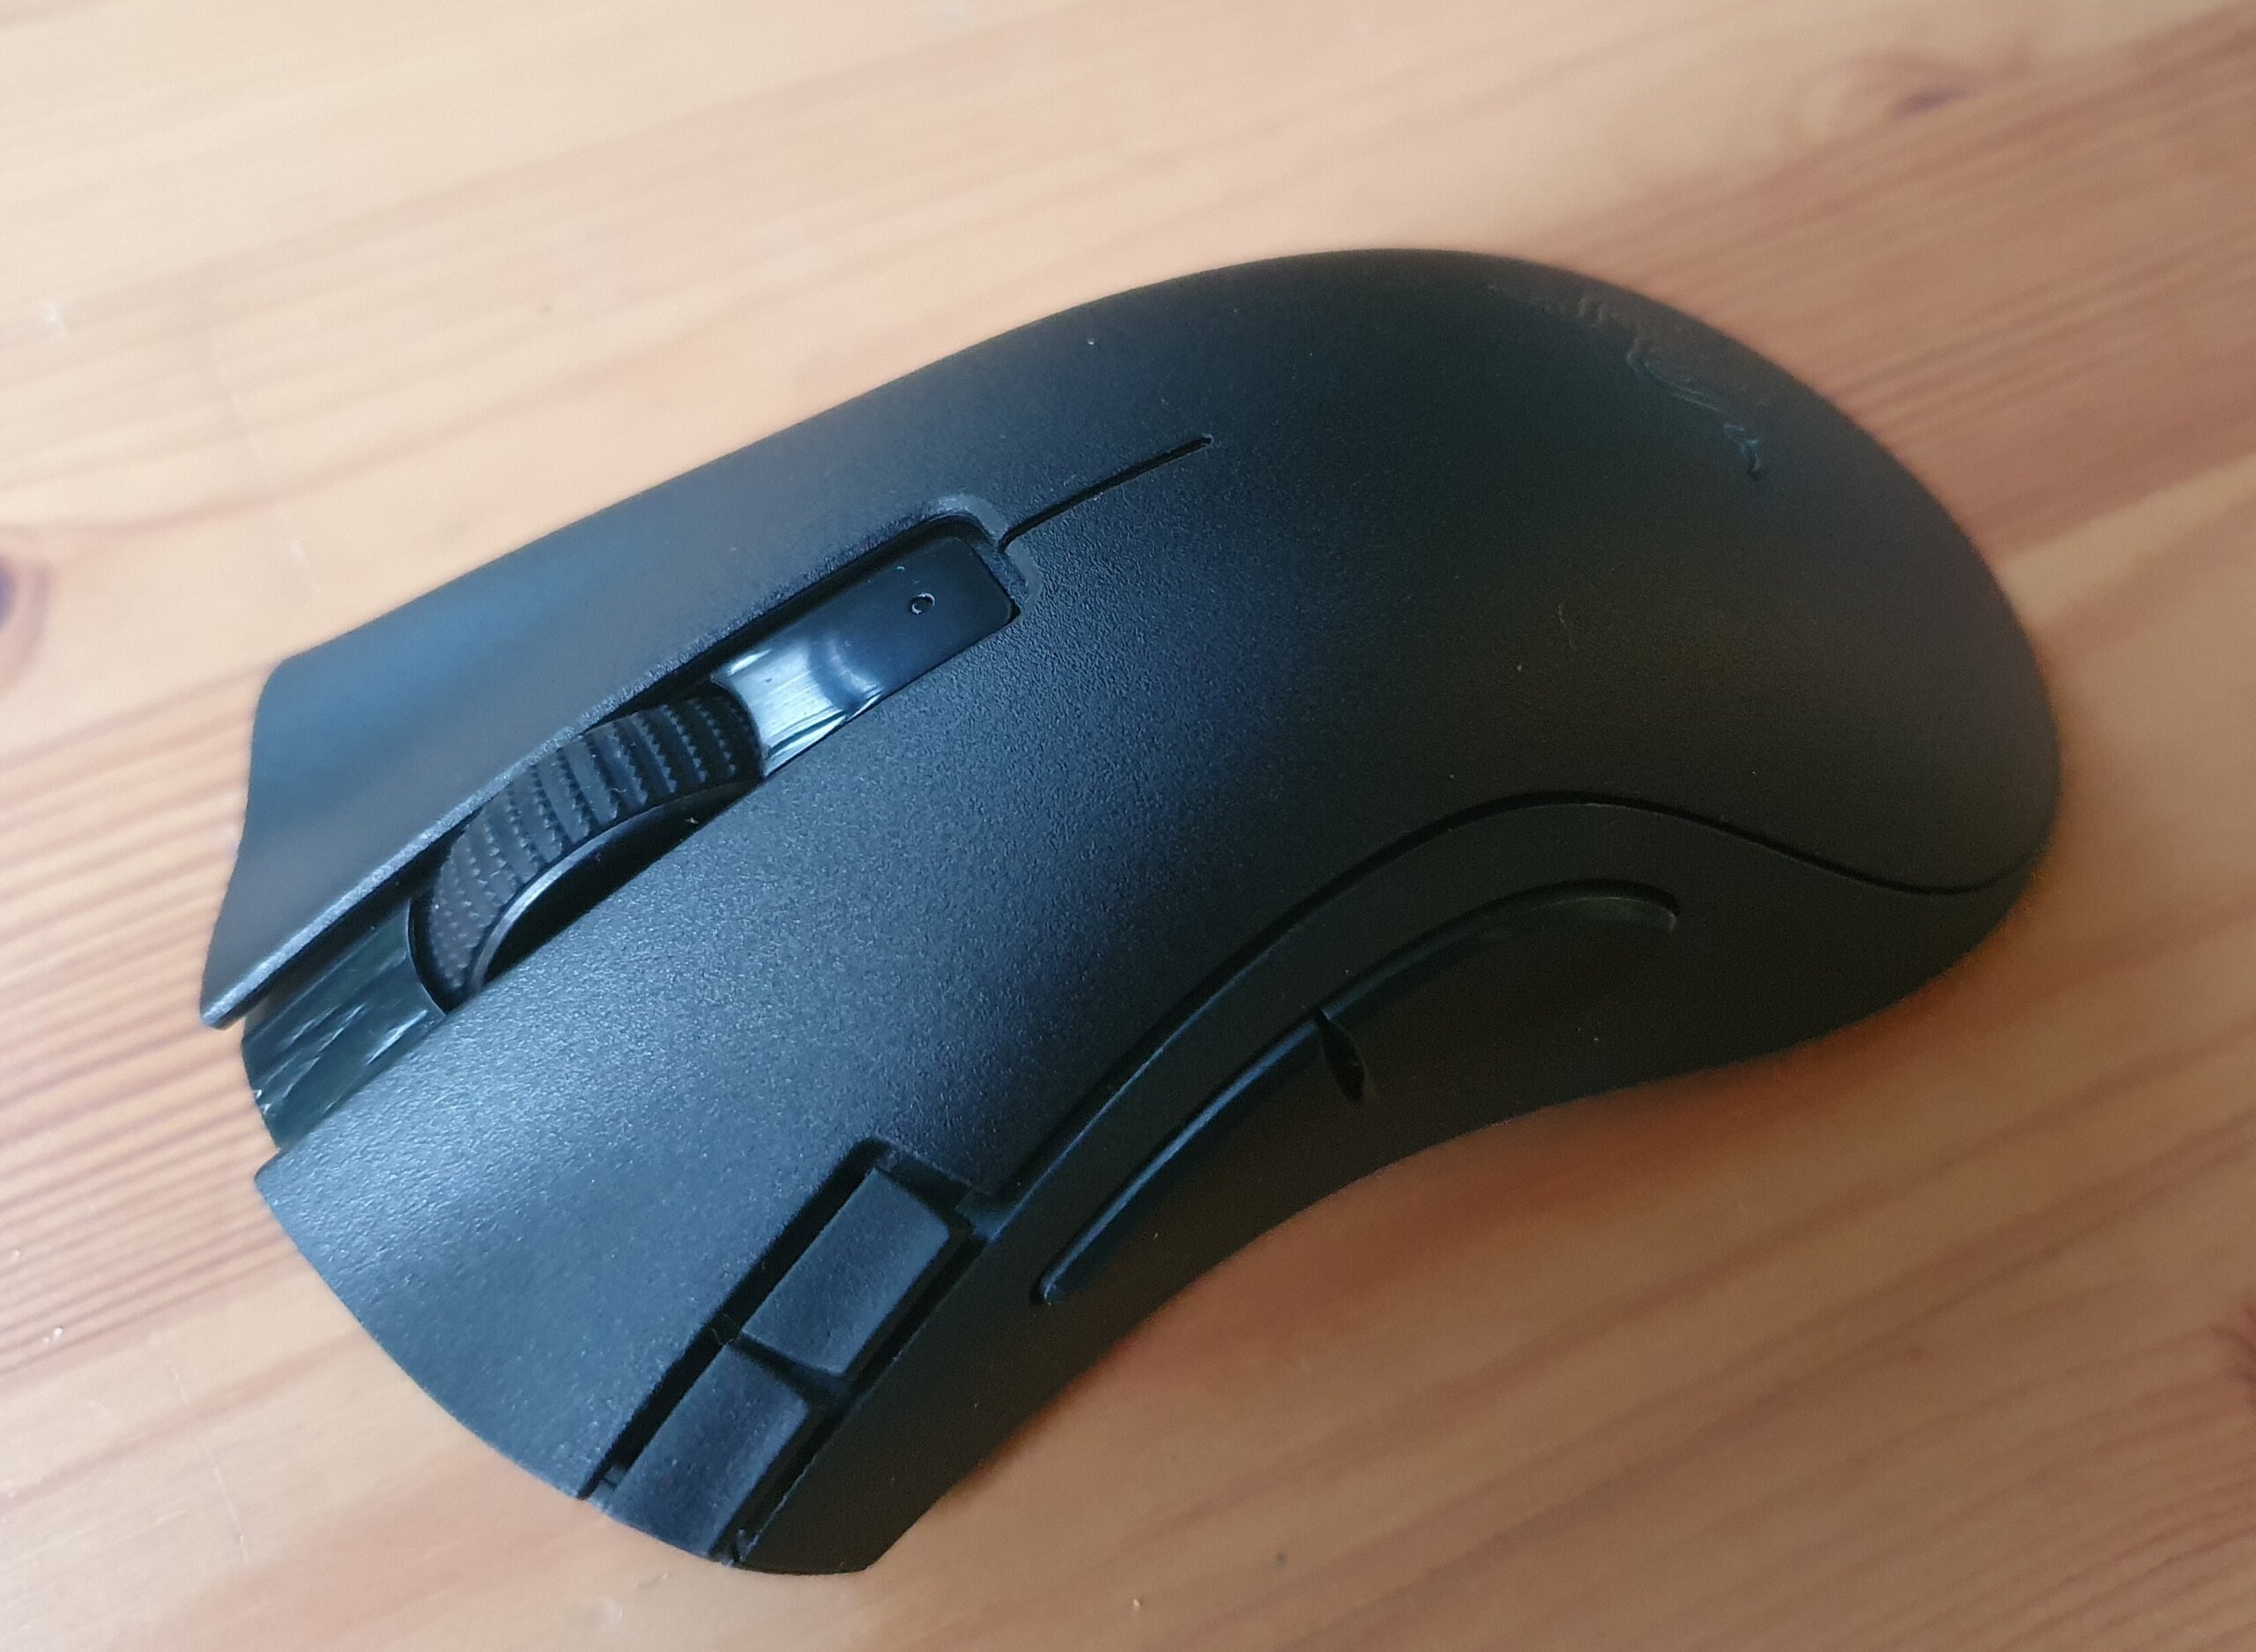 Razer DeathAdder V2 X Hyperspeed evaluate: A refined purchase on the gaming mouse